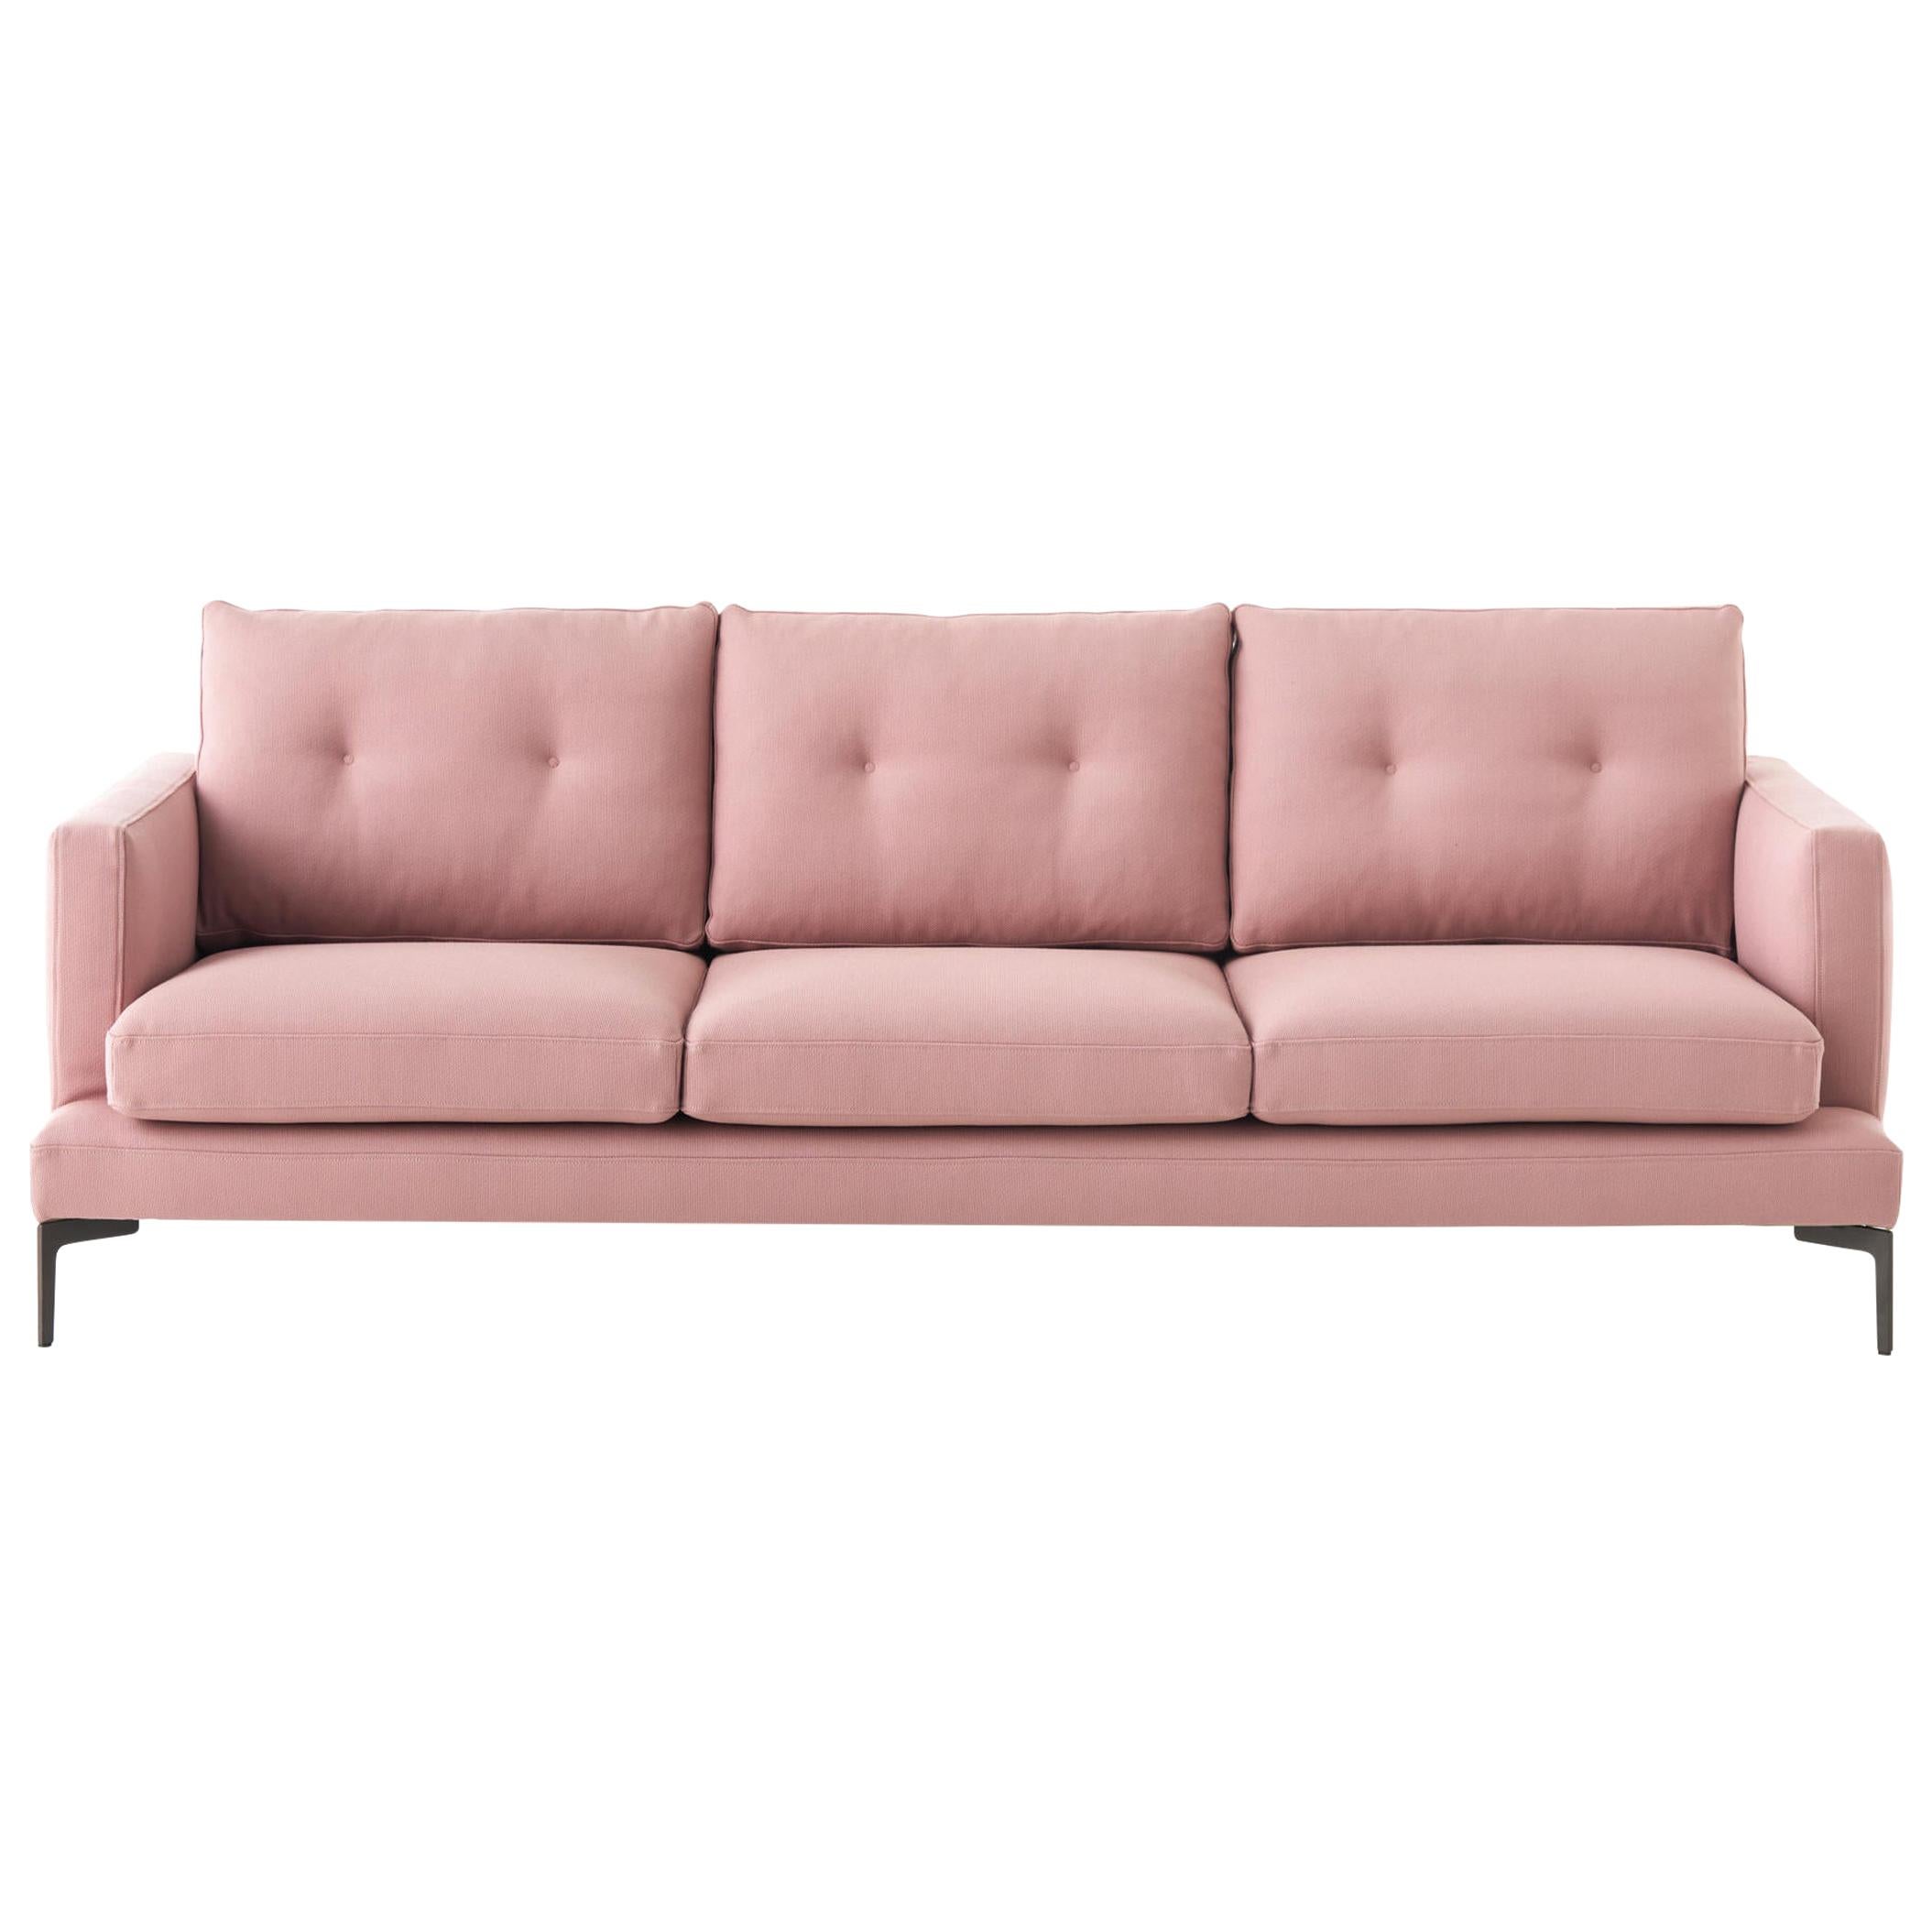 Essentiel Pink Sofa, Designed by Sergio Bicego, Made in Italy For Sale